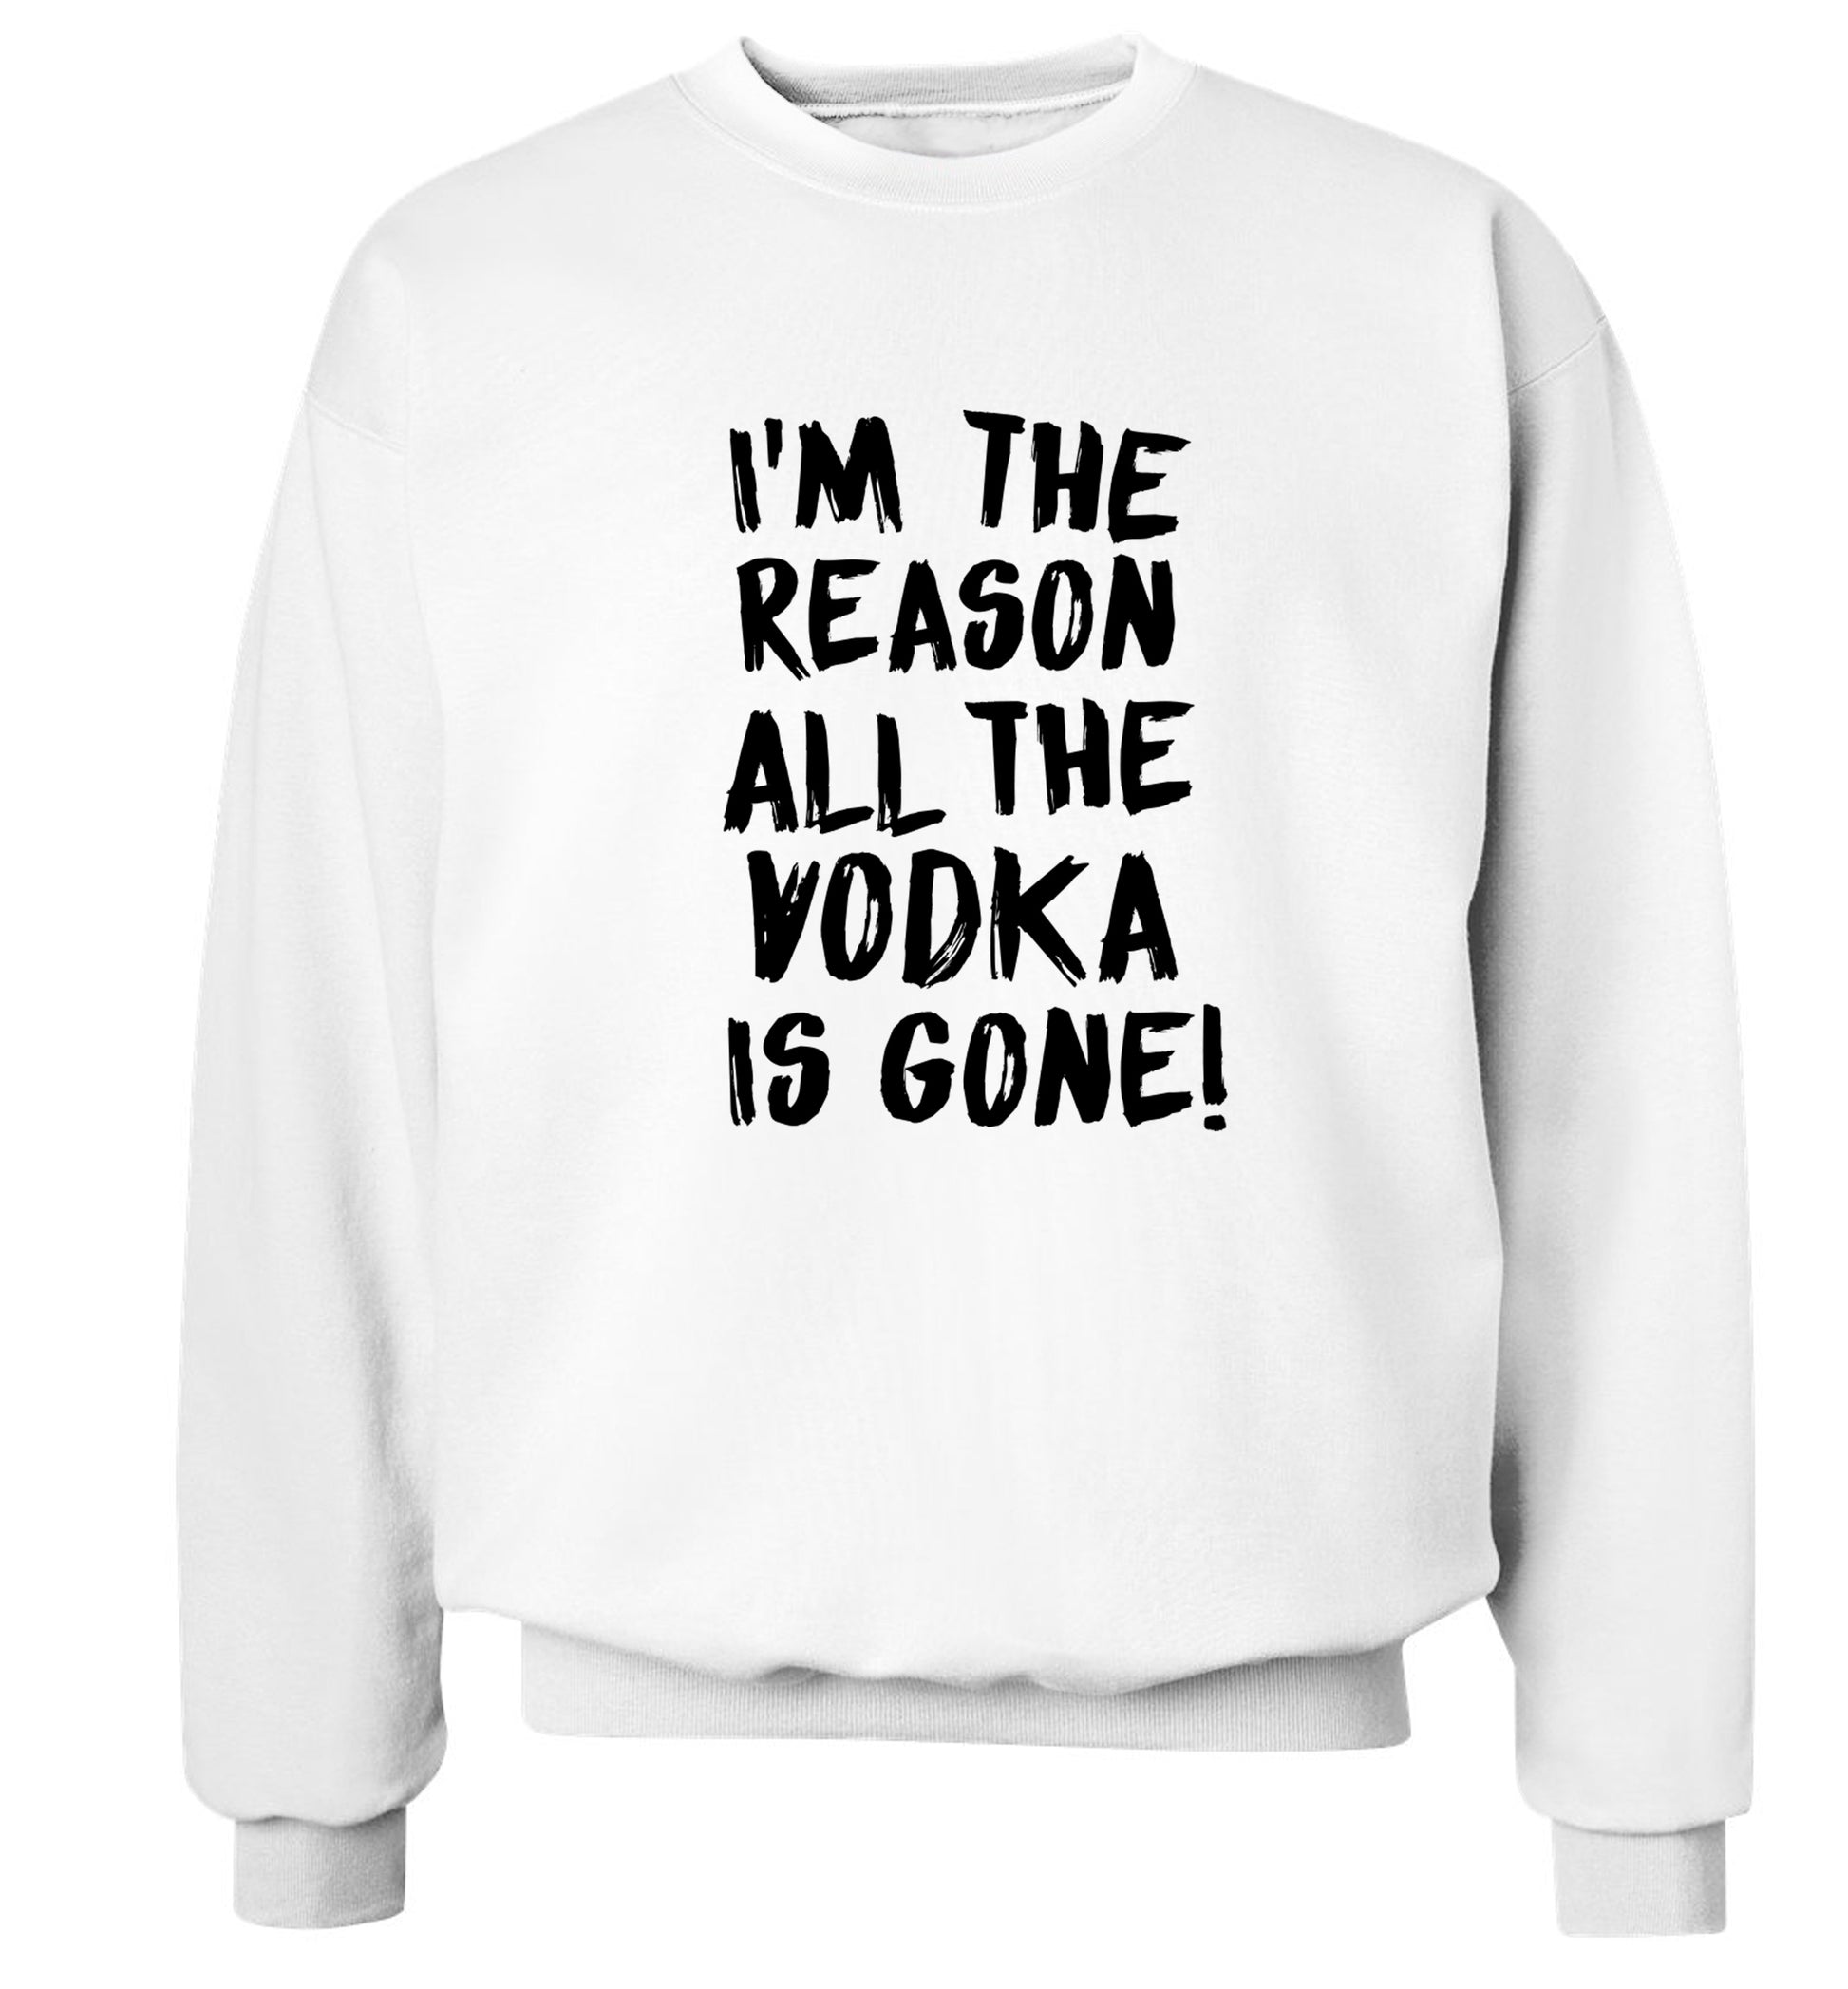 I'm the reason all the tequila is gone Adult's unisex white Sweater 2XL